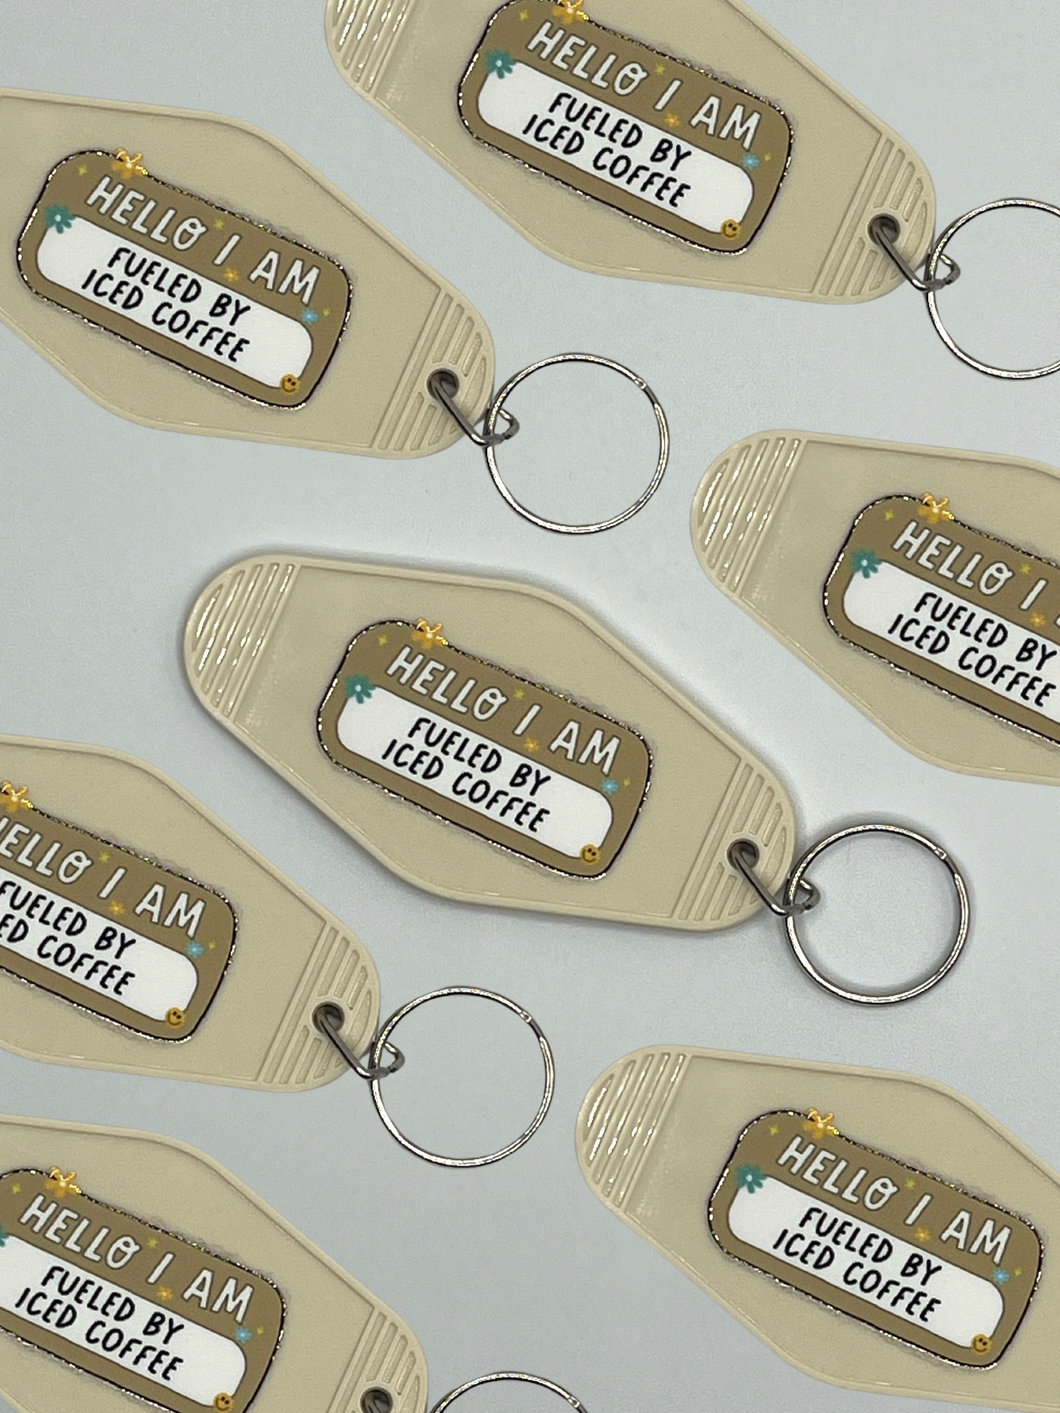 Fueled By Iced Coffee Keychain